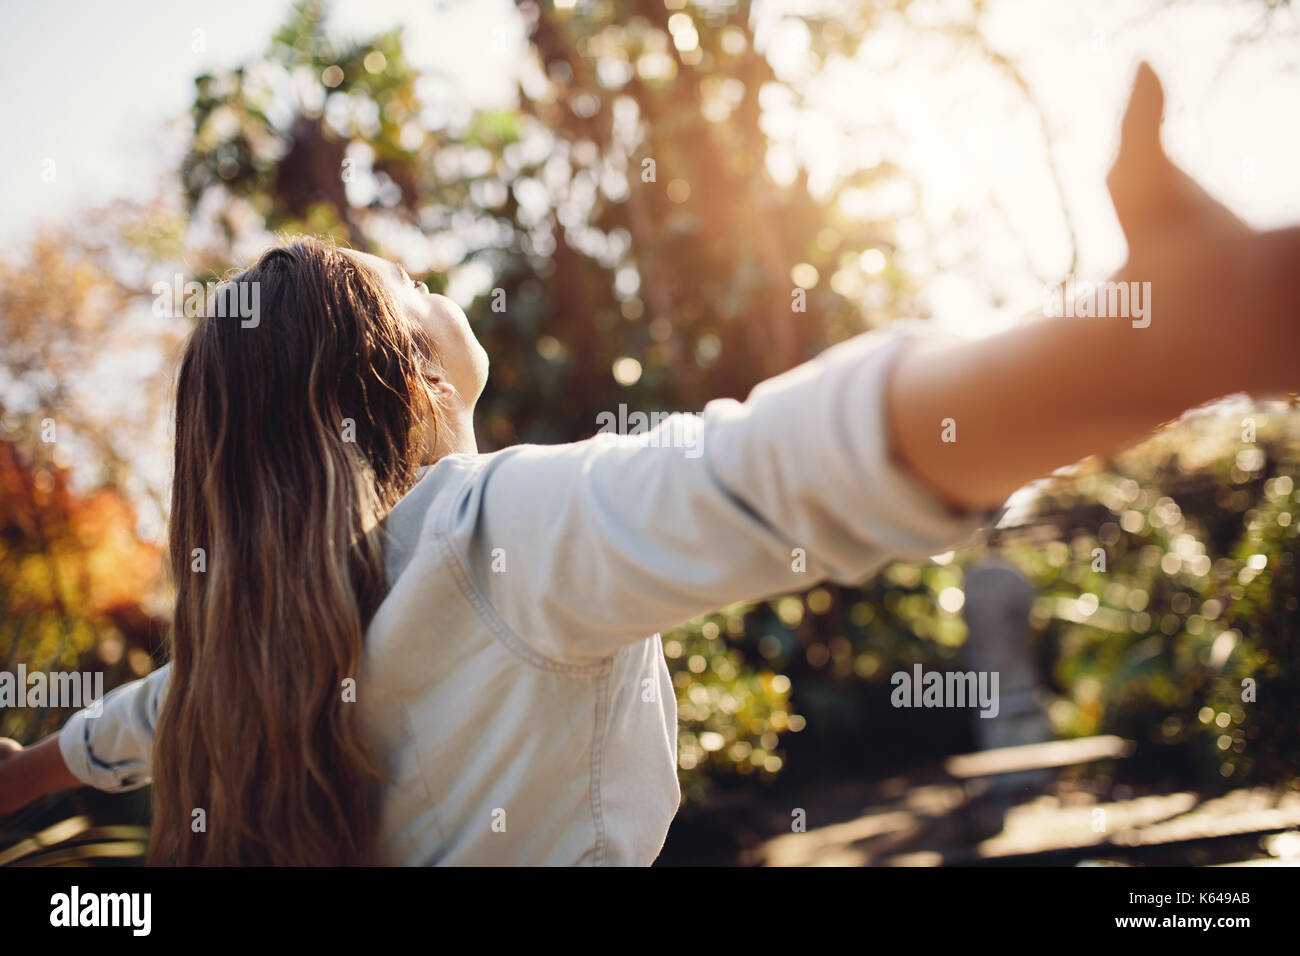 Young woman spreading hands with joy and inspiration outdoors. Female feeling free with arms wide open. Stock Photo